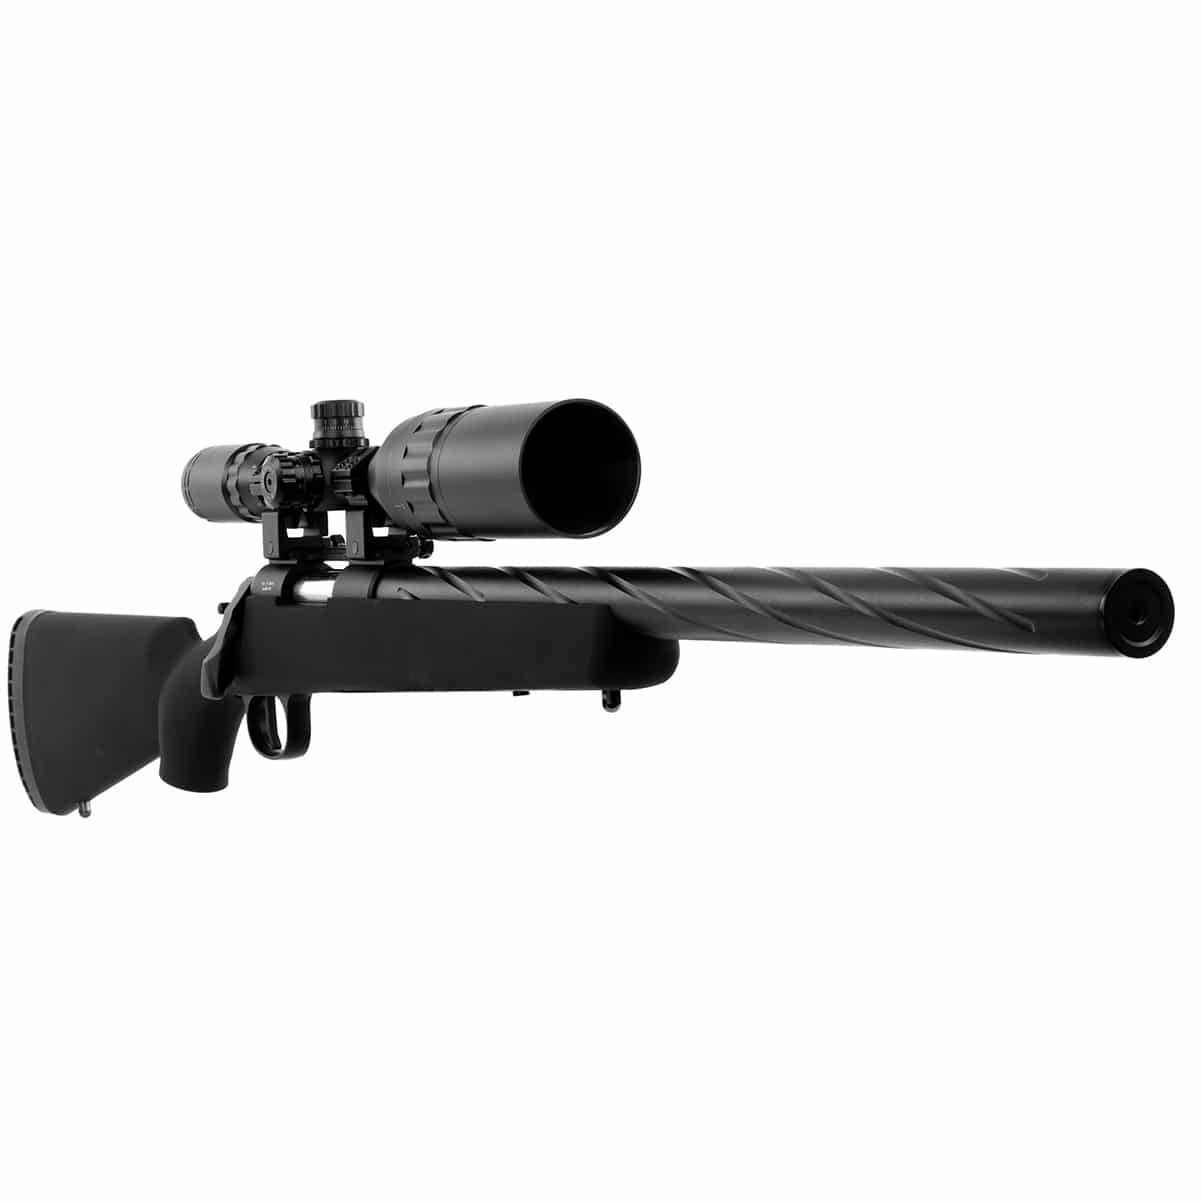 Airsoft Sniper Rifles for your needs on Battlefield